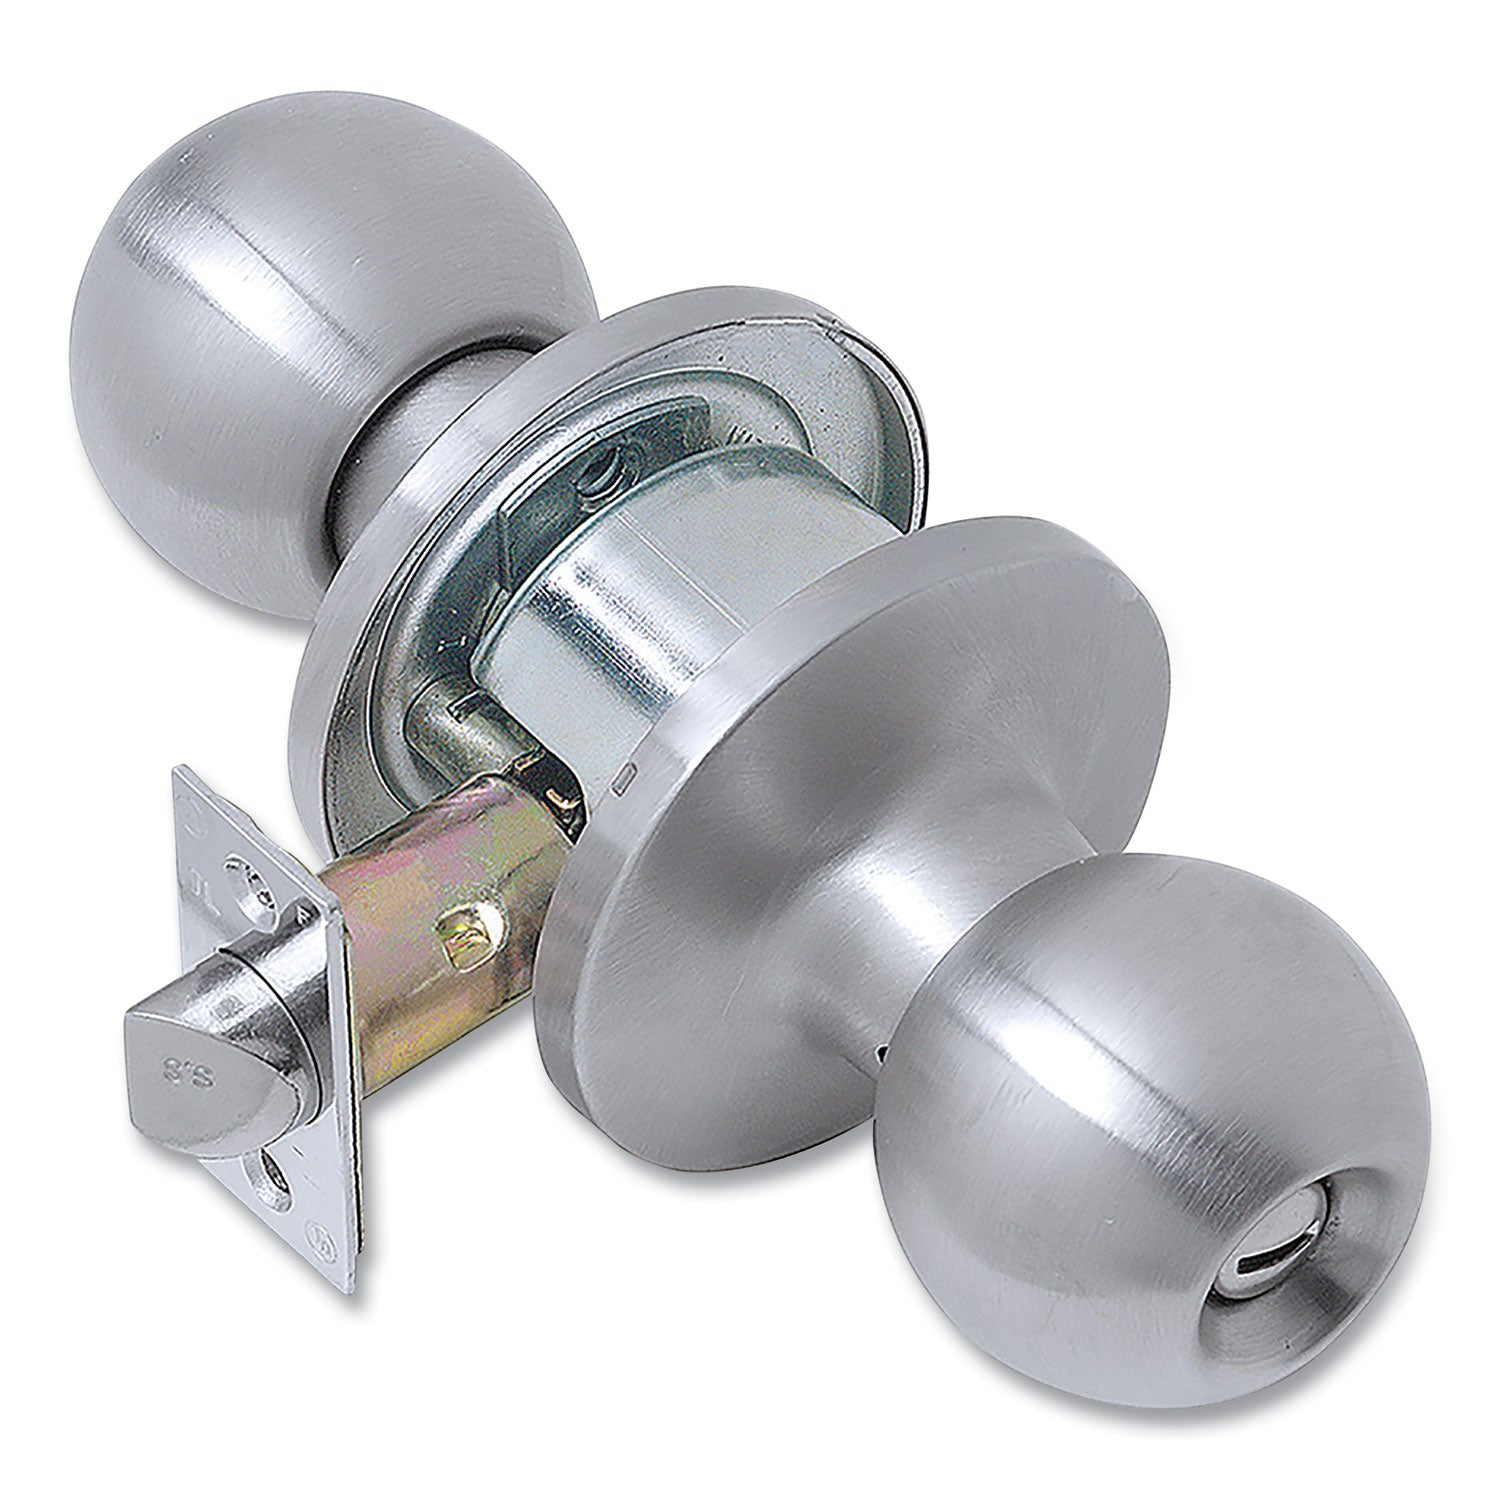 light-duty-commercial-privacy-knob-lockset-stainless-steel-finish_pfqcl100295 - 1